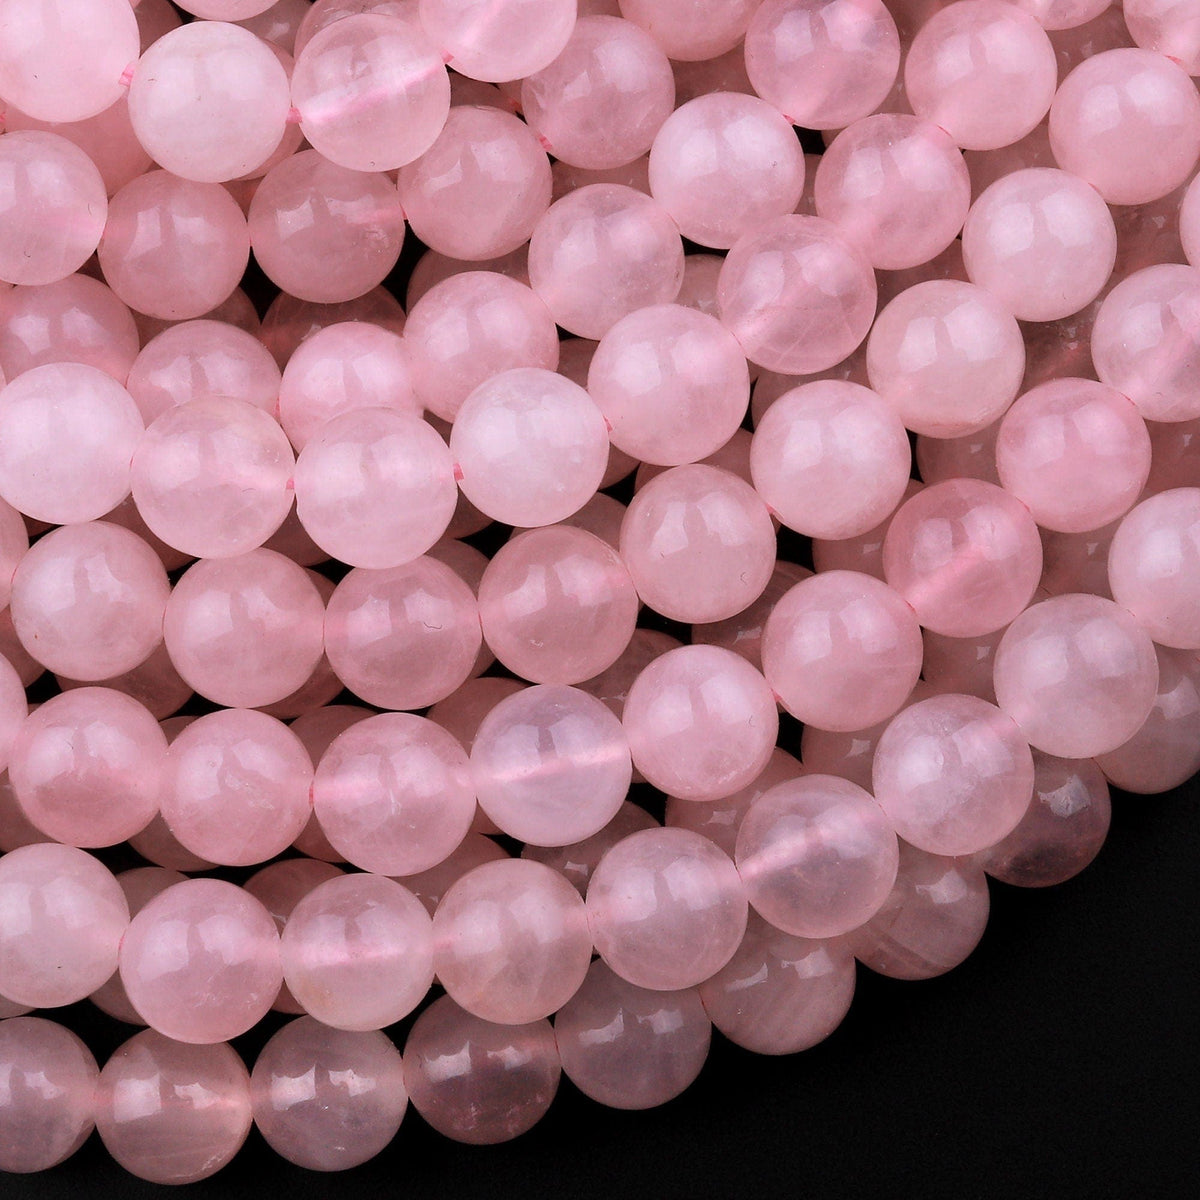 2019 Fantasy Castle Round Beads For Jewelry Making Family Fun Pink